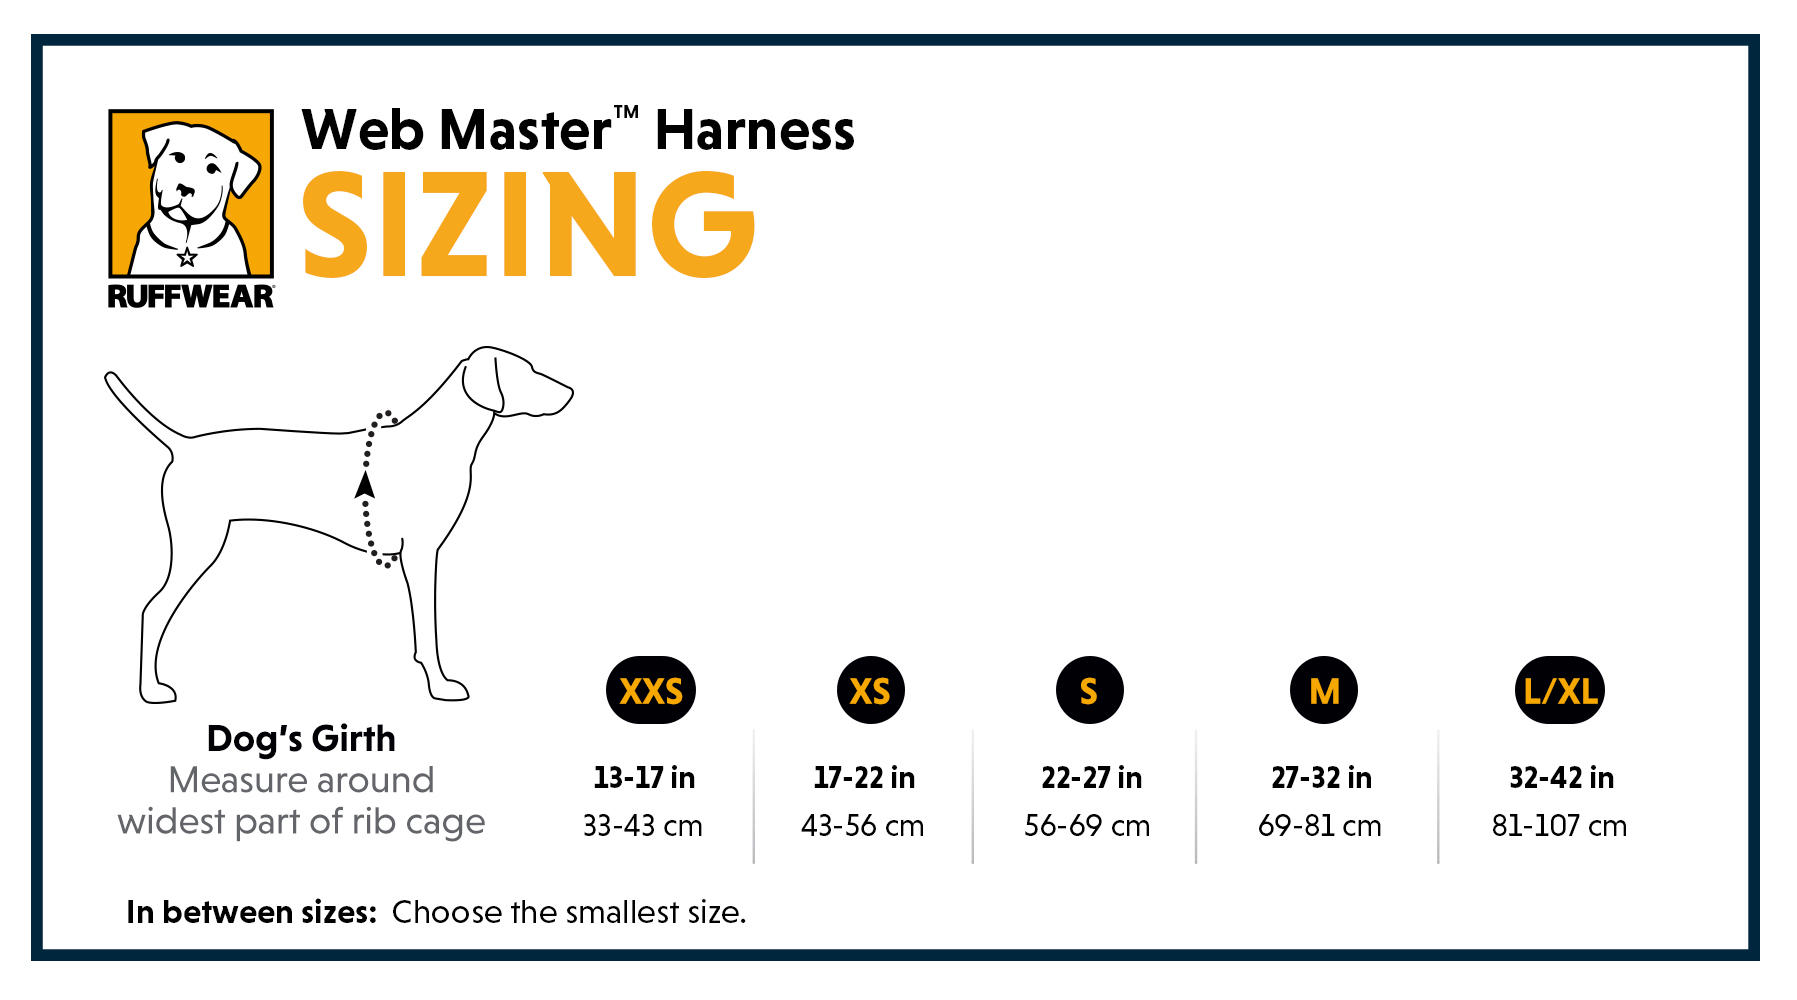 Ruffwear Web Master Harness For Dogs Size Guide